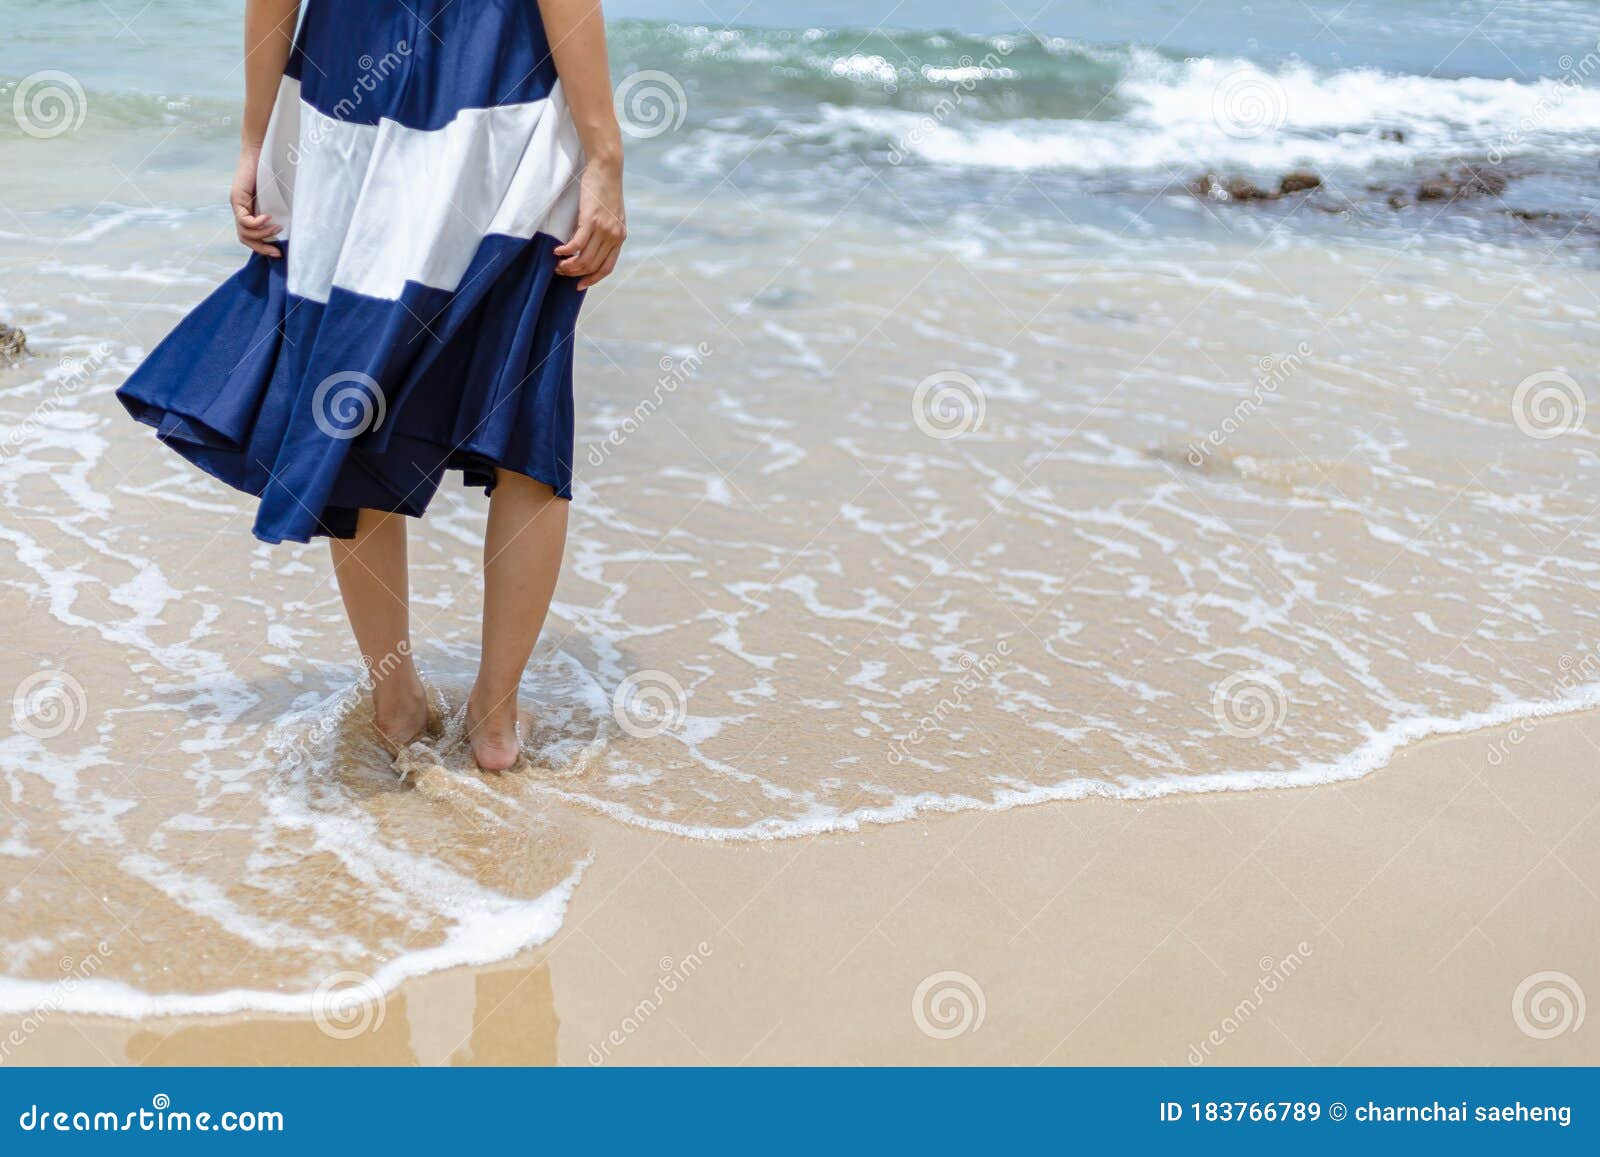 Back View Of A Woman Walking Barefoot On A Caribbean Beach 